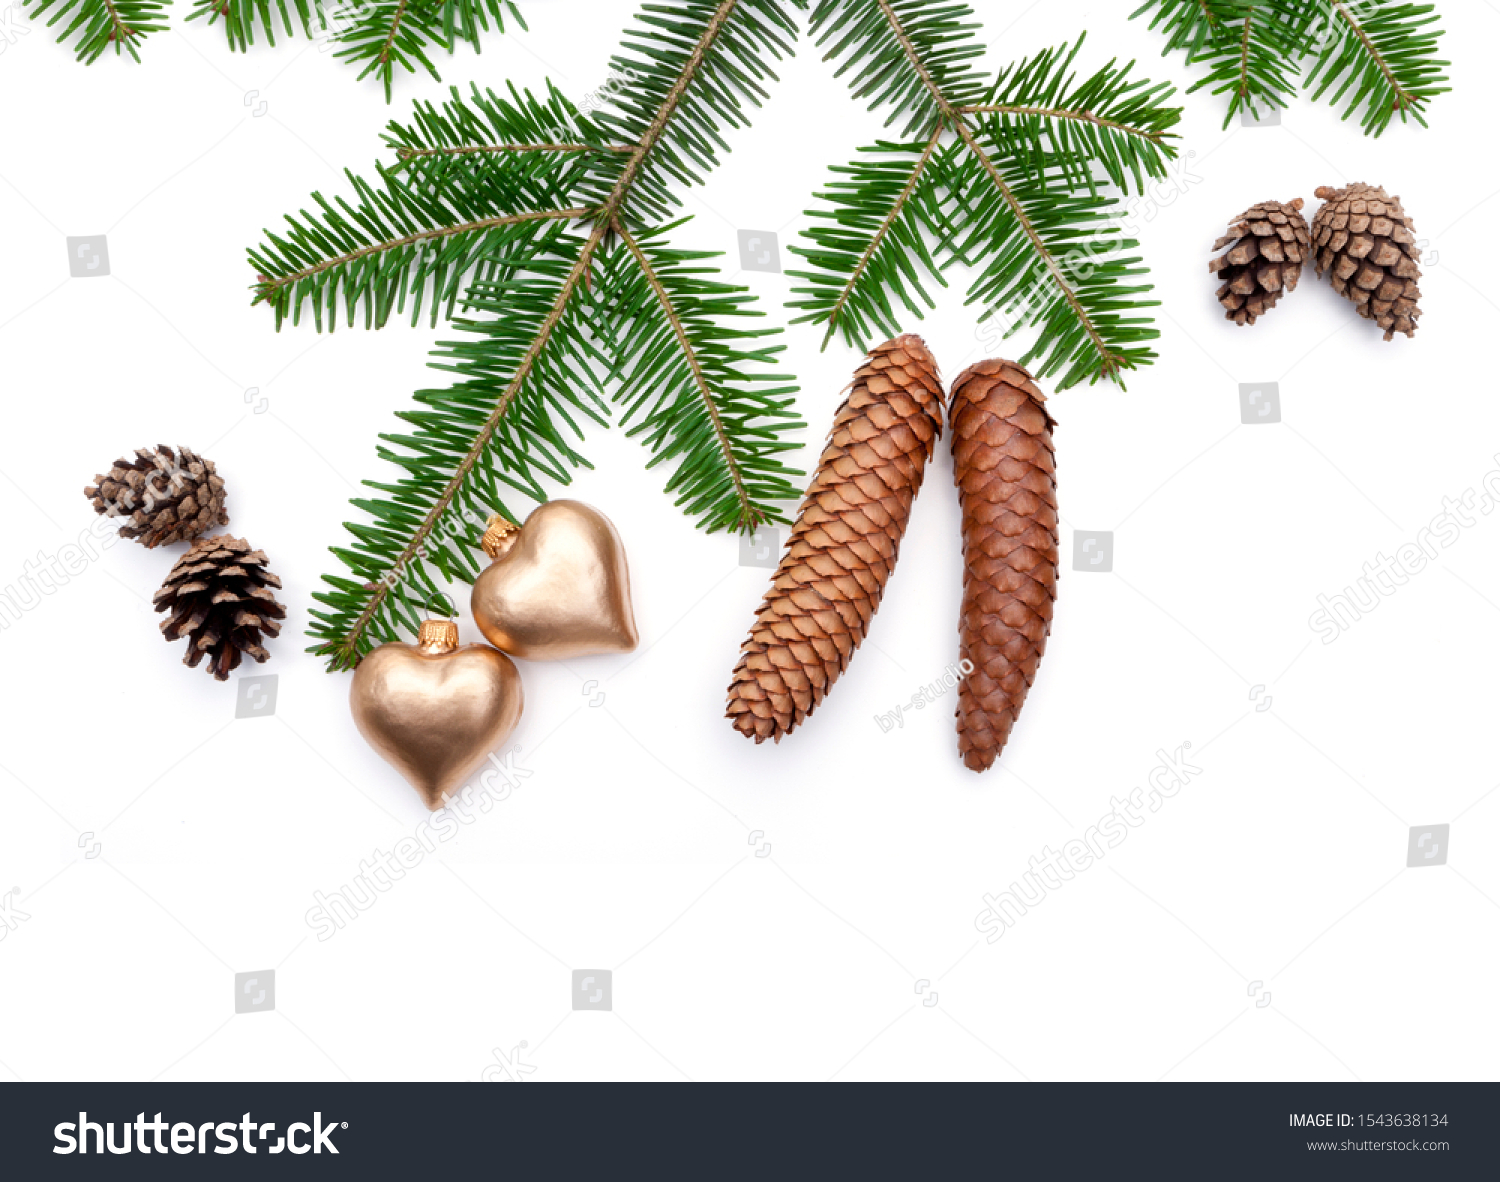 Evergreen fir branch with fir cone as decoration isolated on white background #1543638134